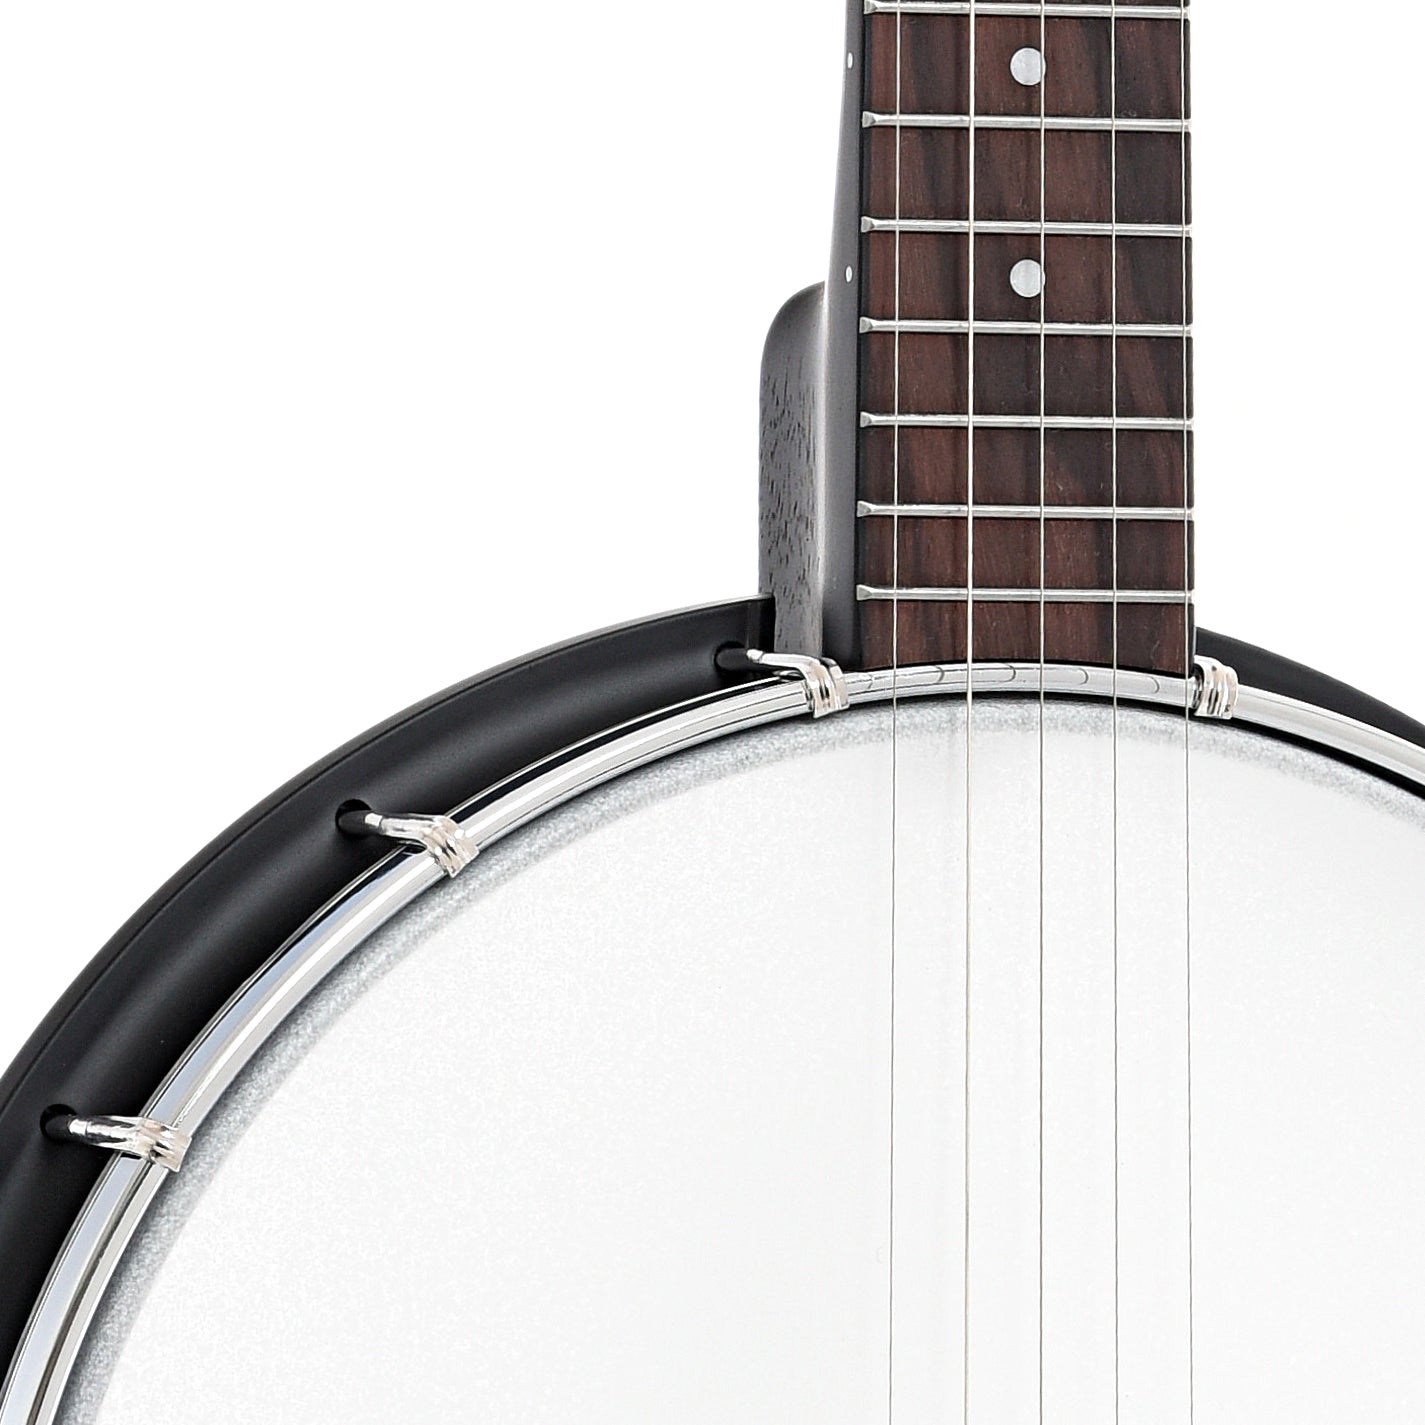 Front body and neck join of Gold Tone AC-1 Openback Banjo